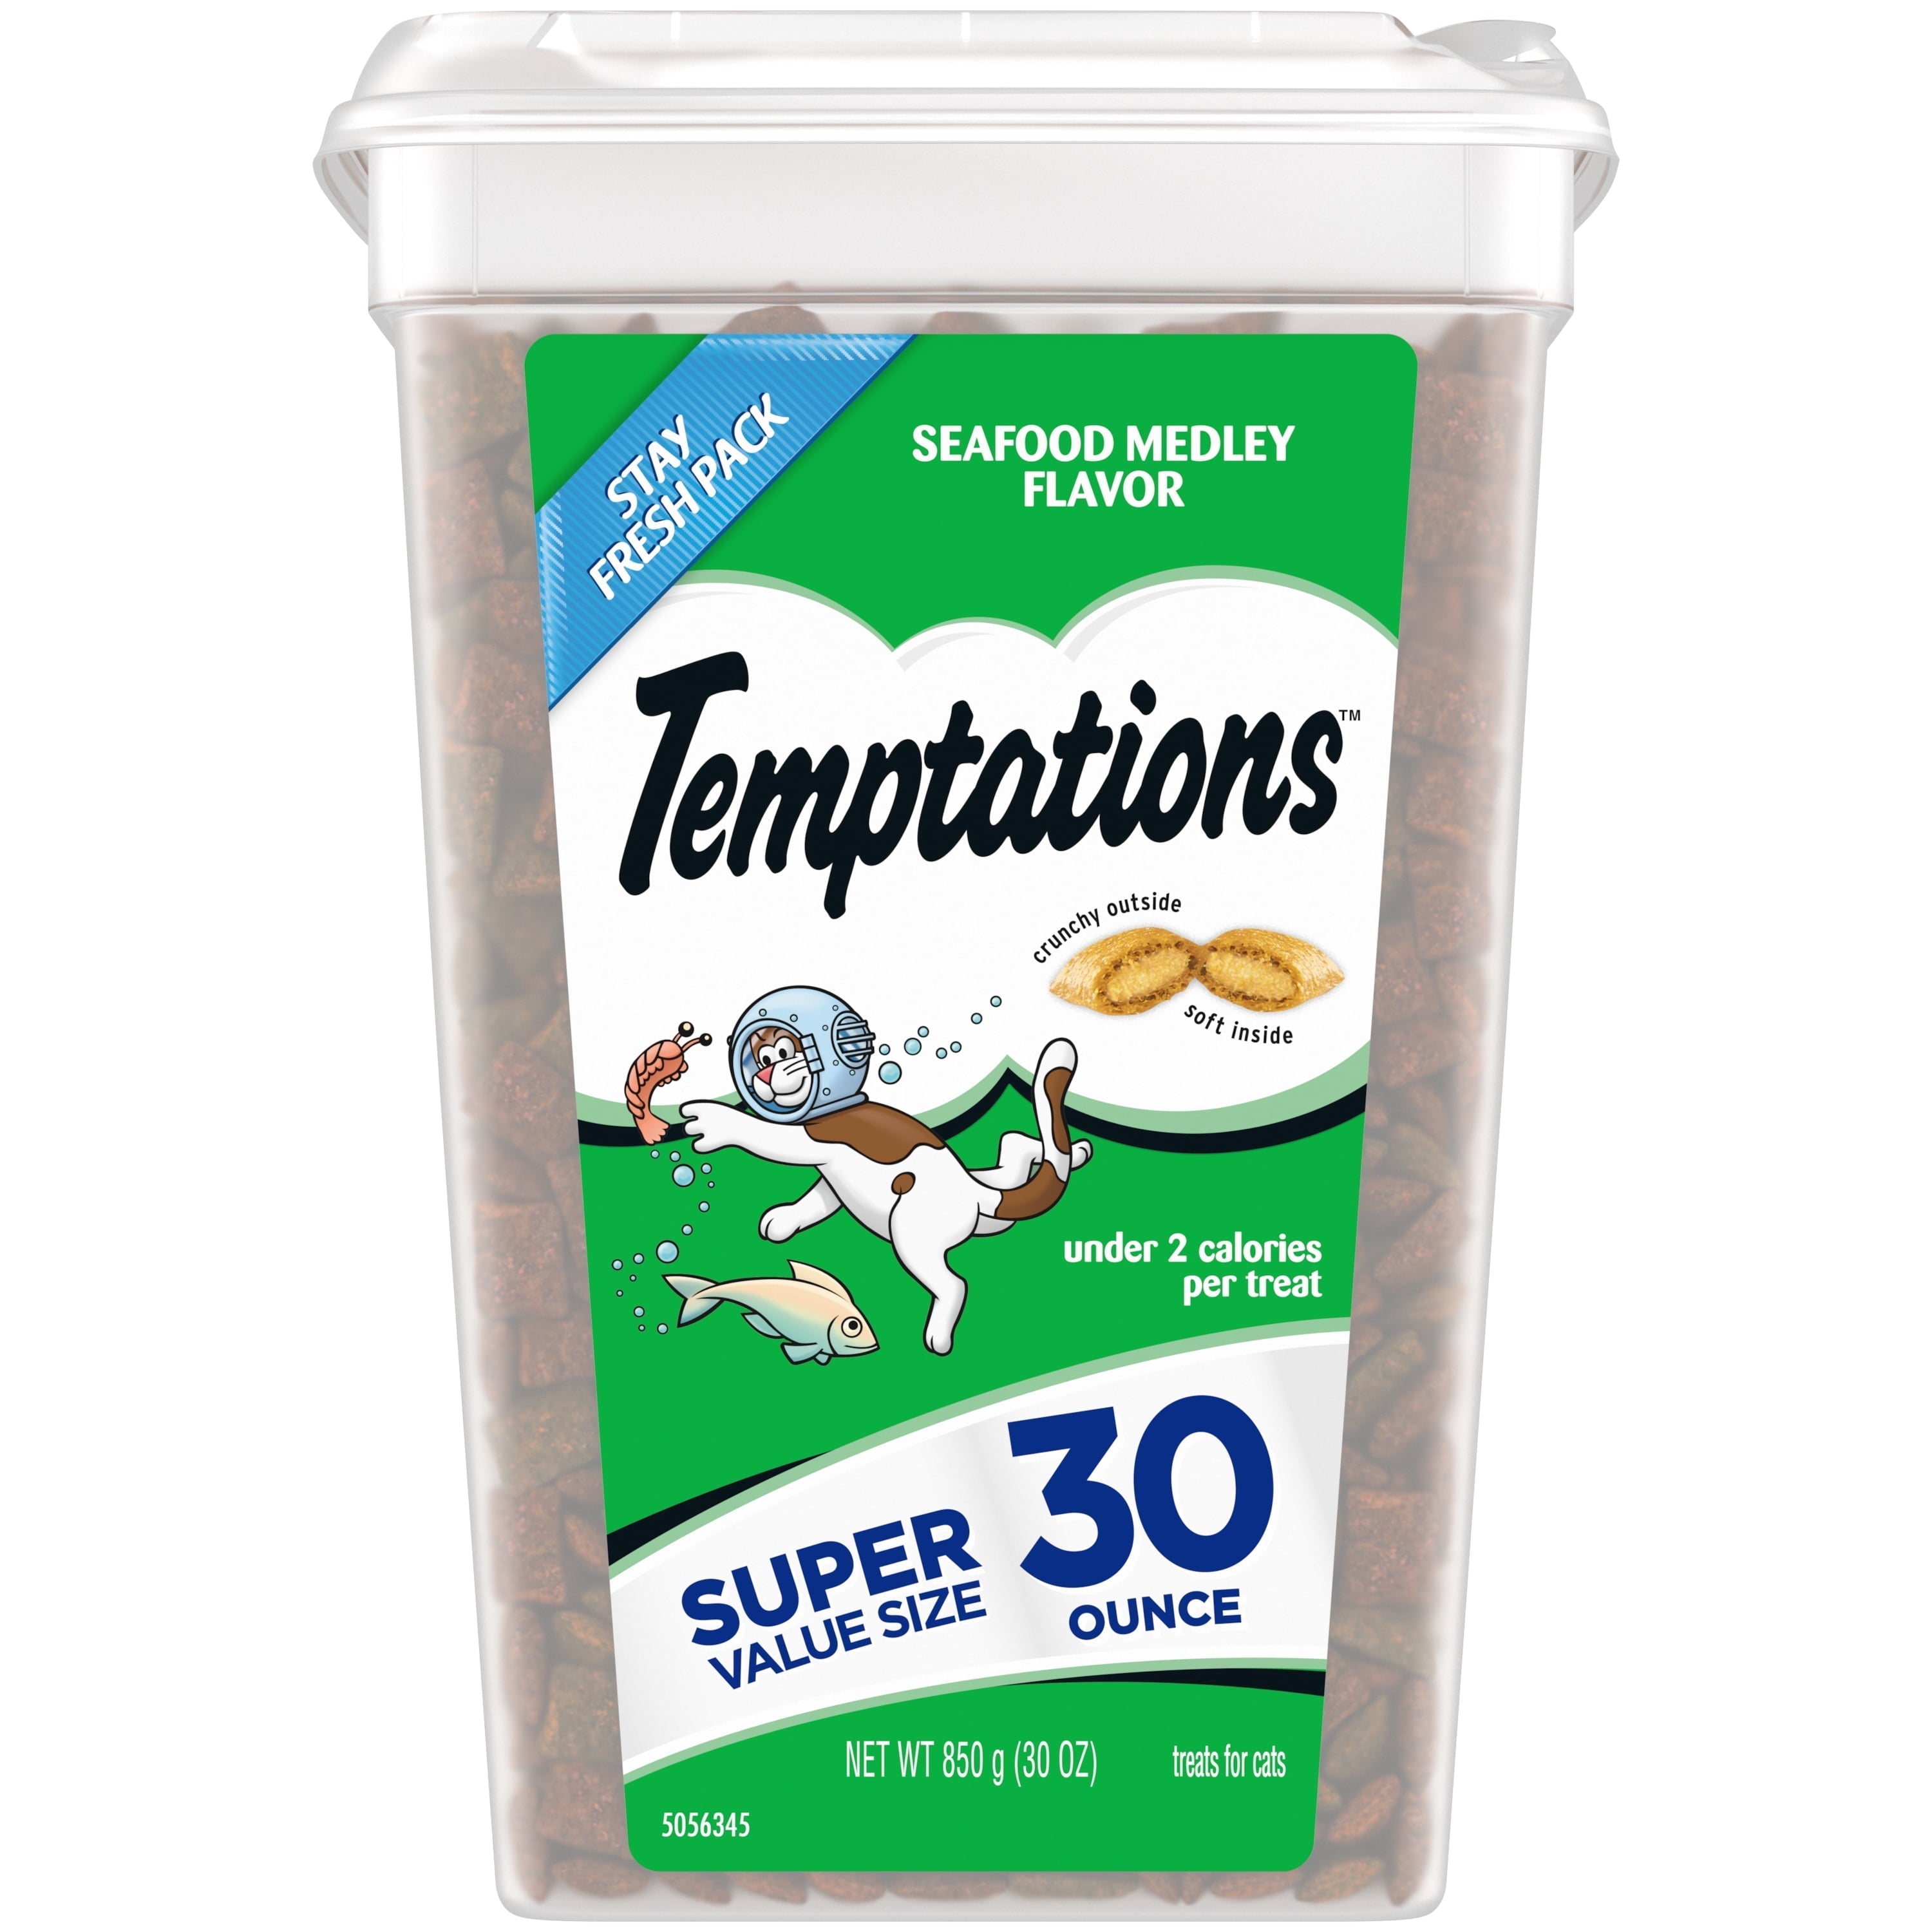 Wholesale prices with free shipping all over United States Temptations Classic Crunchy and Soft Cat Treats Seafood Medley Flavor, 30 oz. Tub - Steven Deals